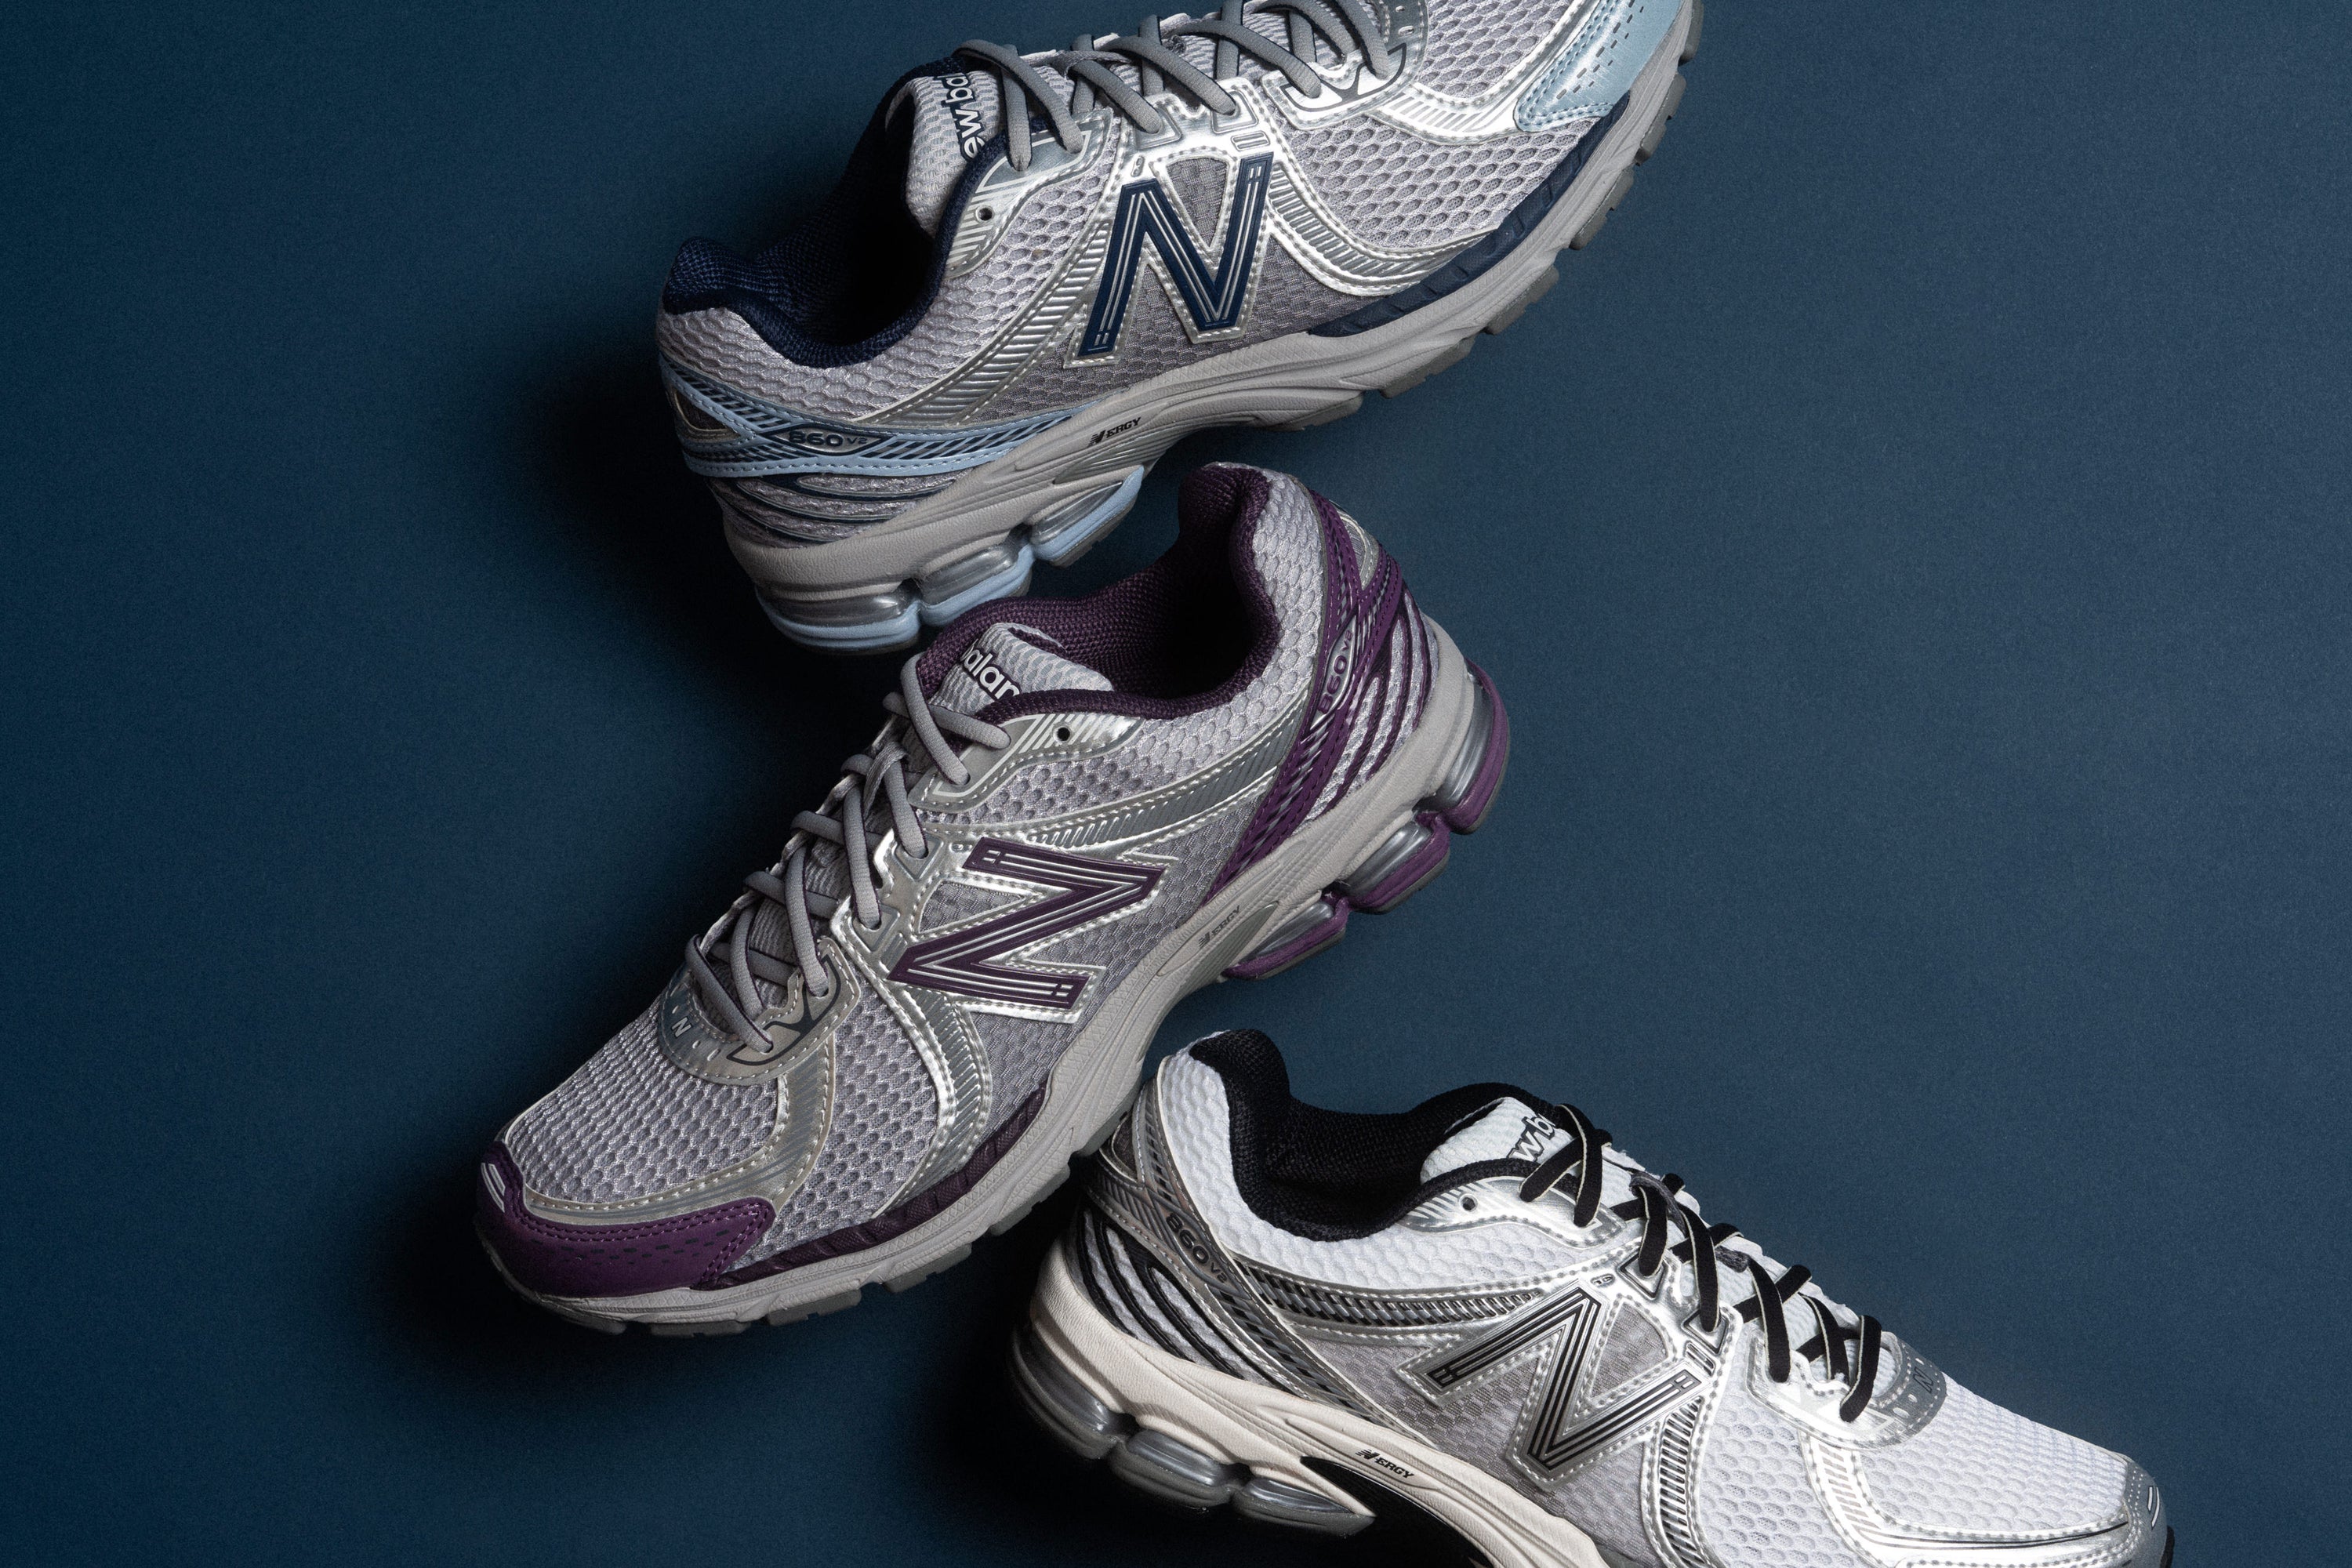 New Balance 860v2 "Milky Way" Collection